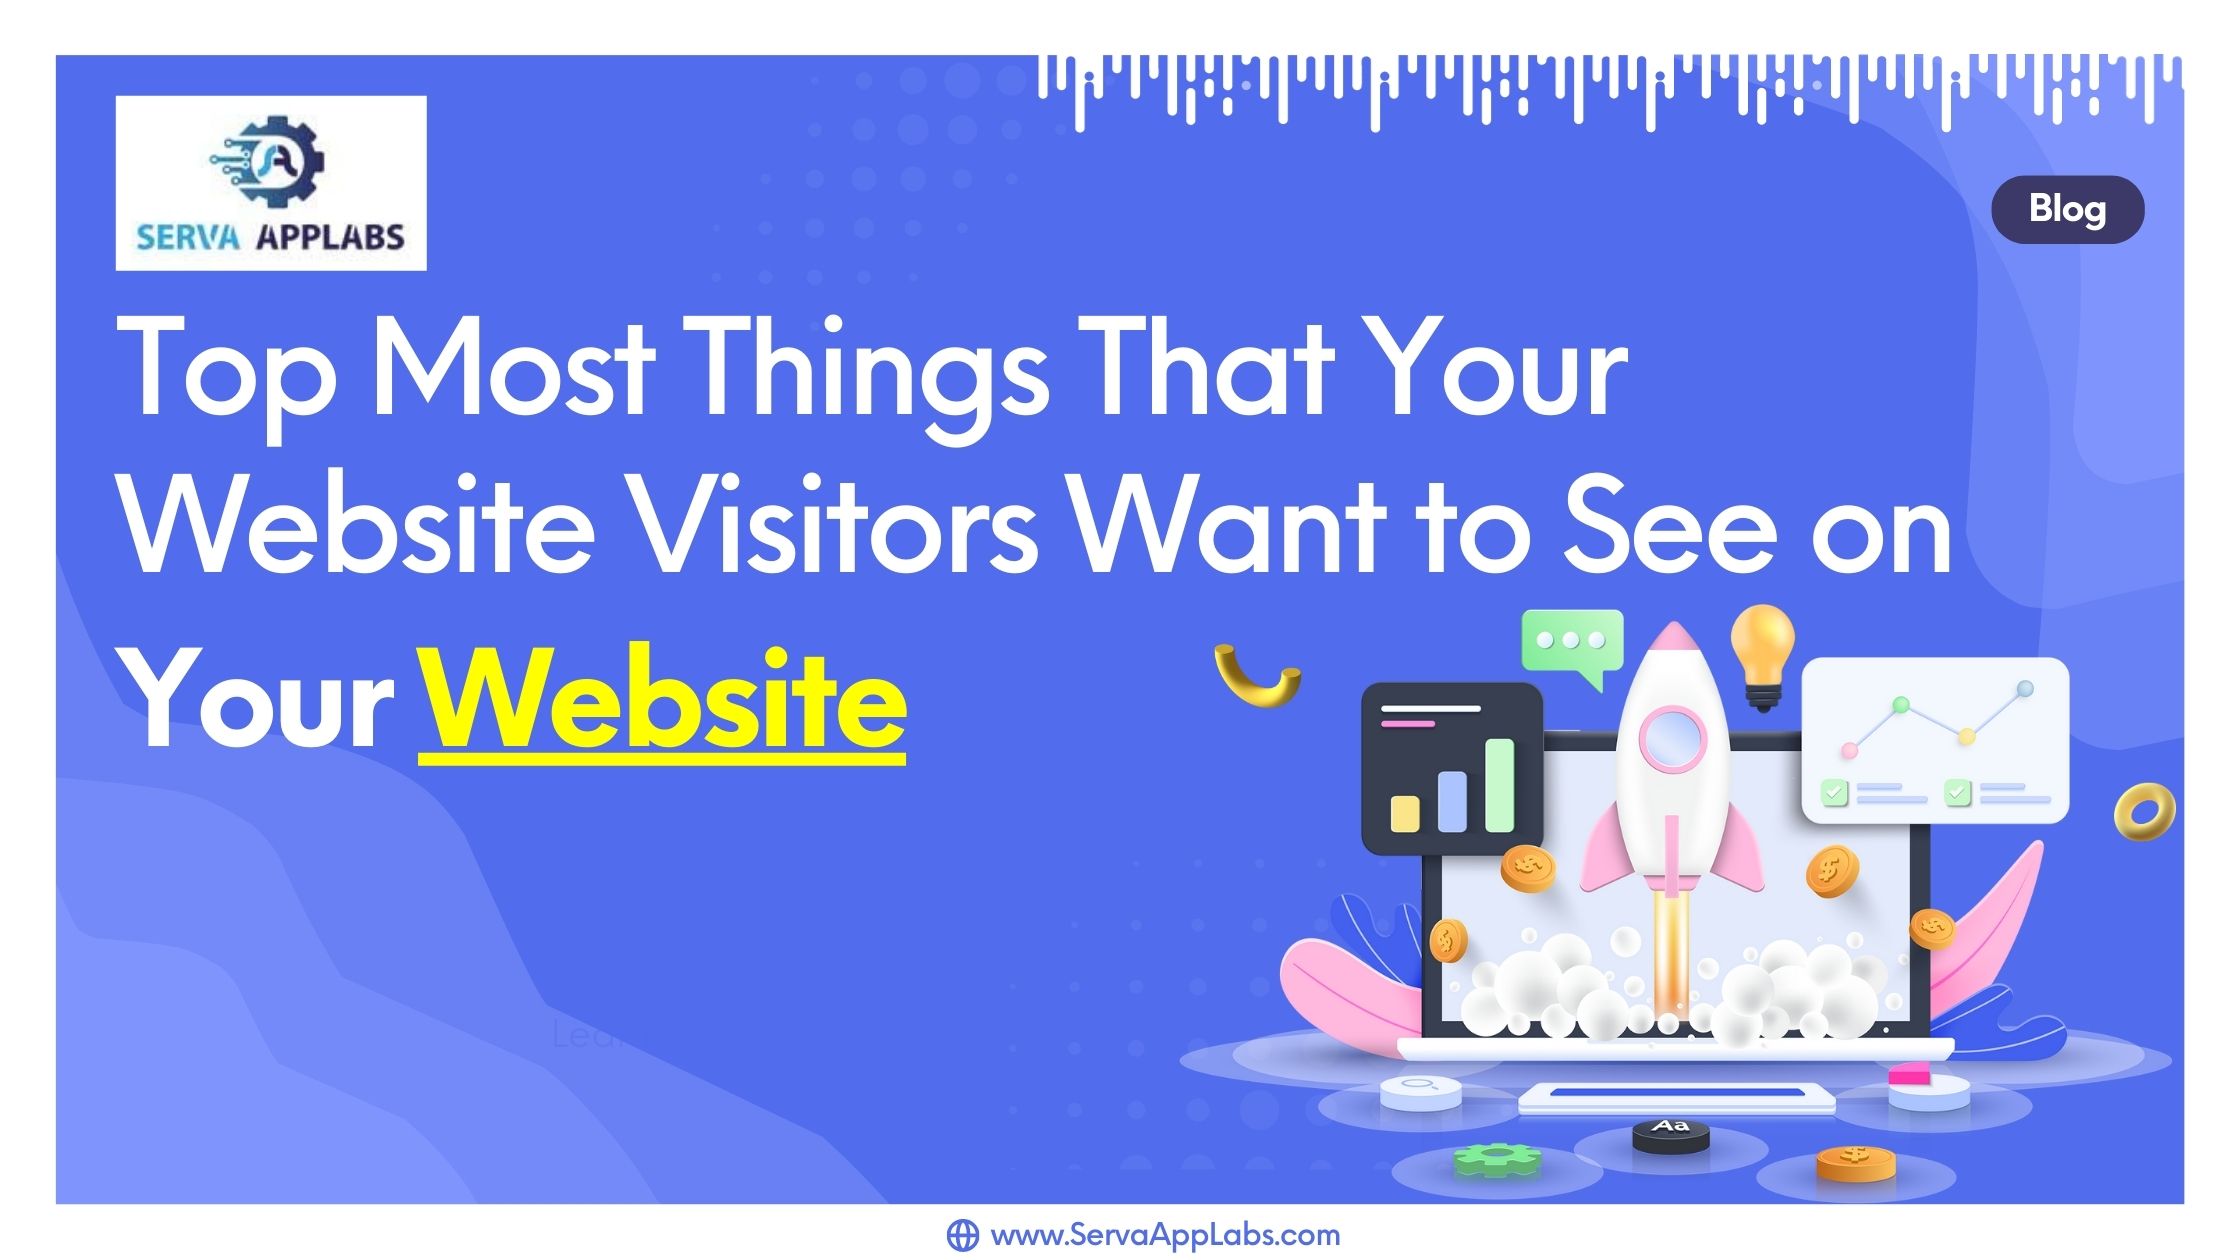 Top Most Things That Your Website Visitors Want to See on Your Website